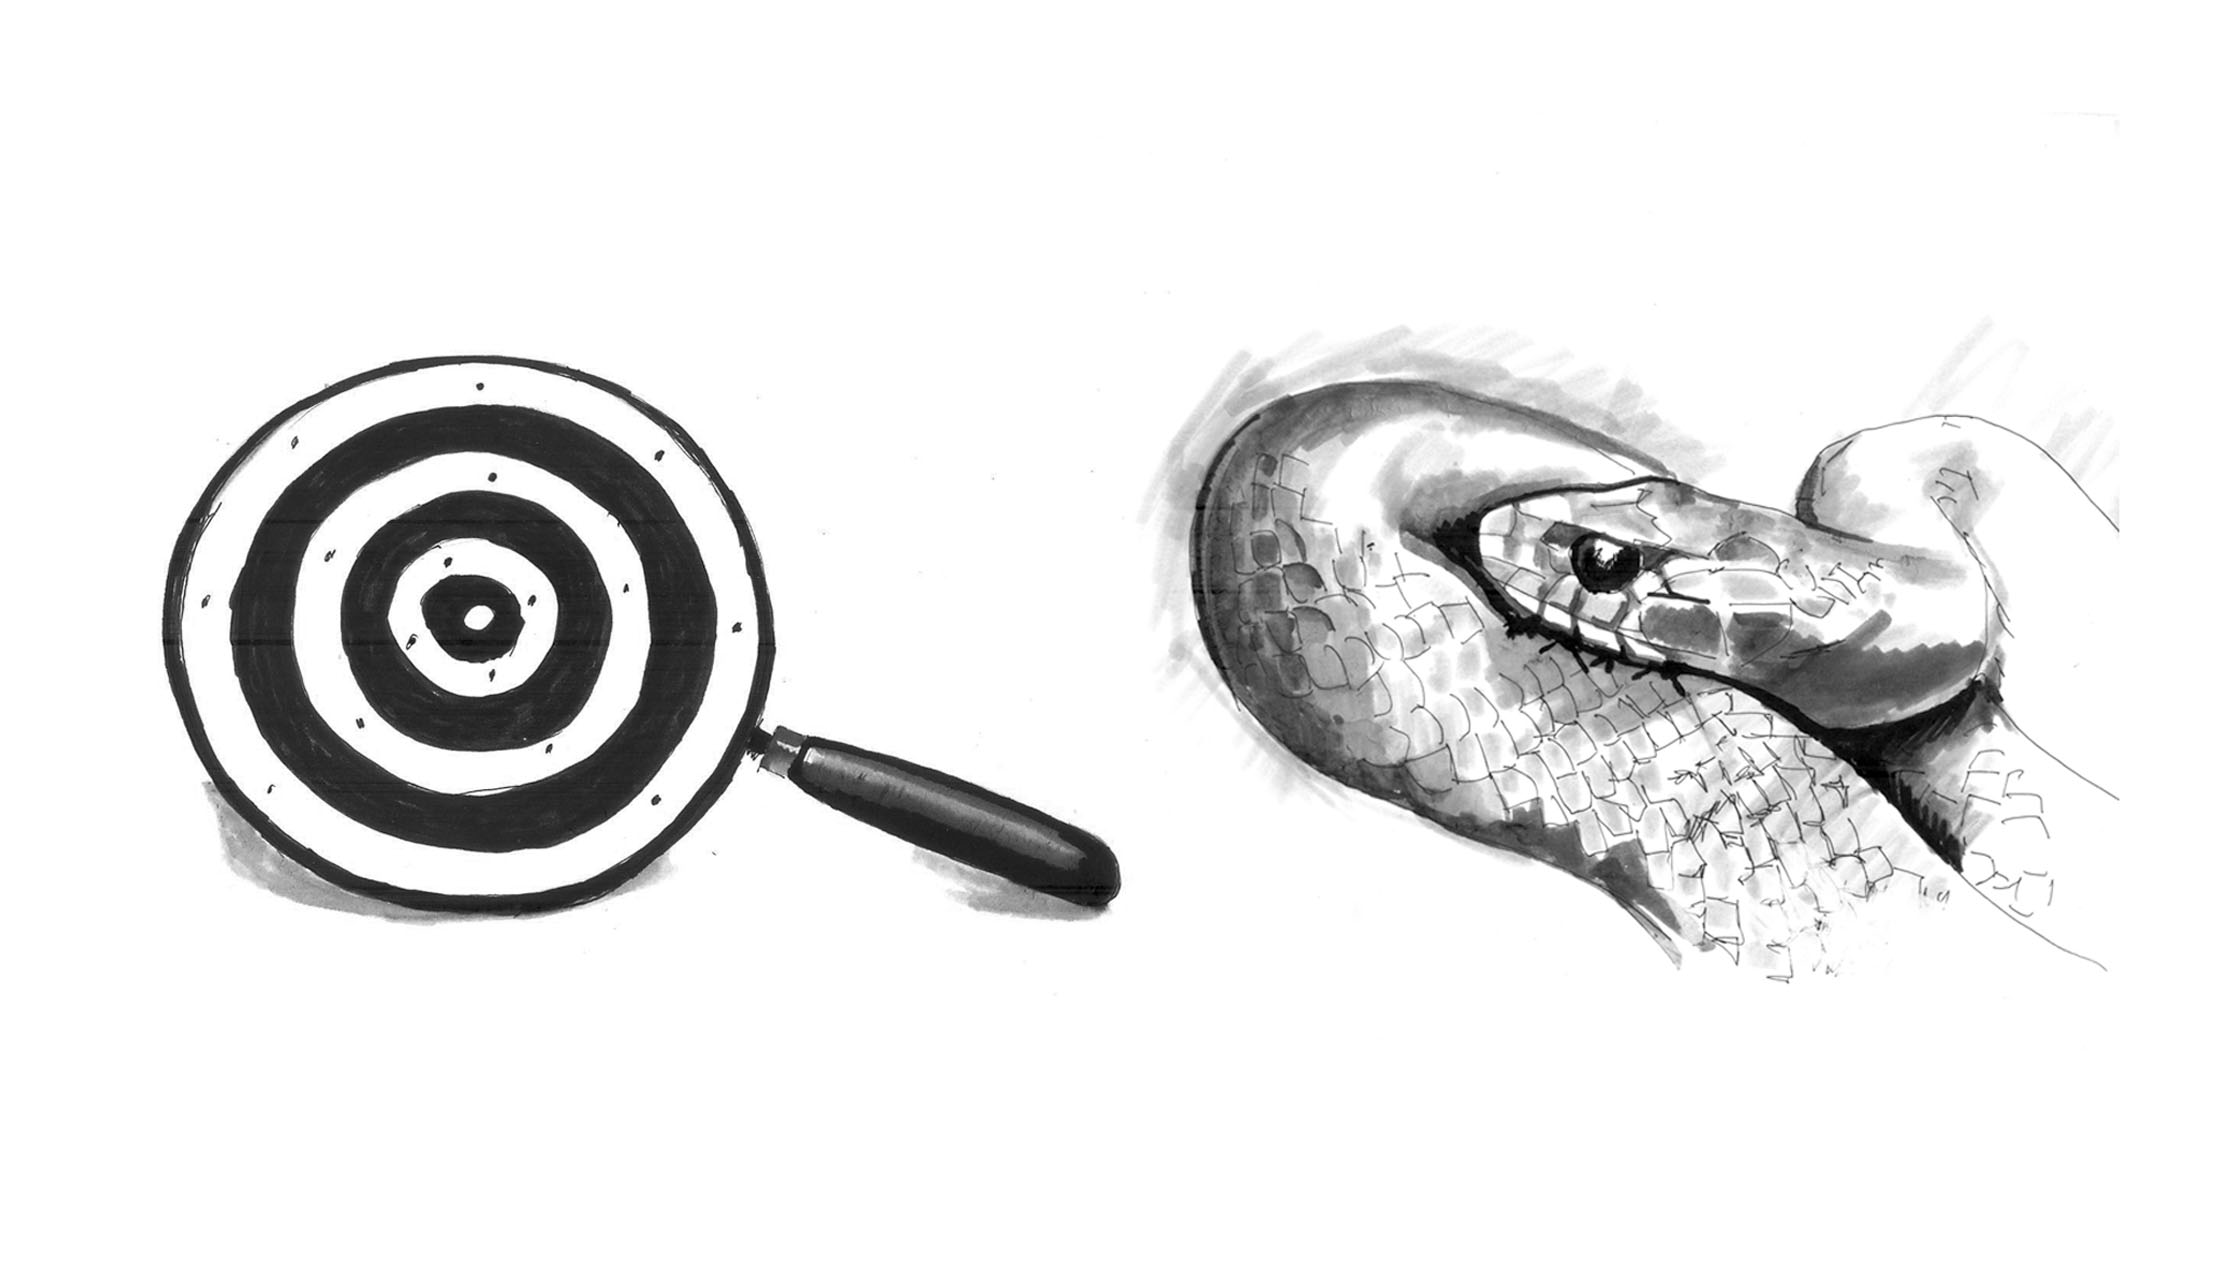 Magnifying glass and snake realistic black and white sketch